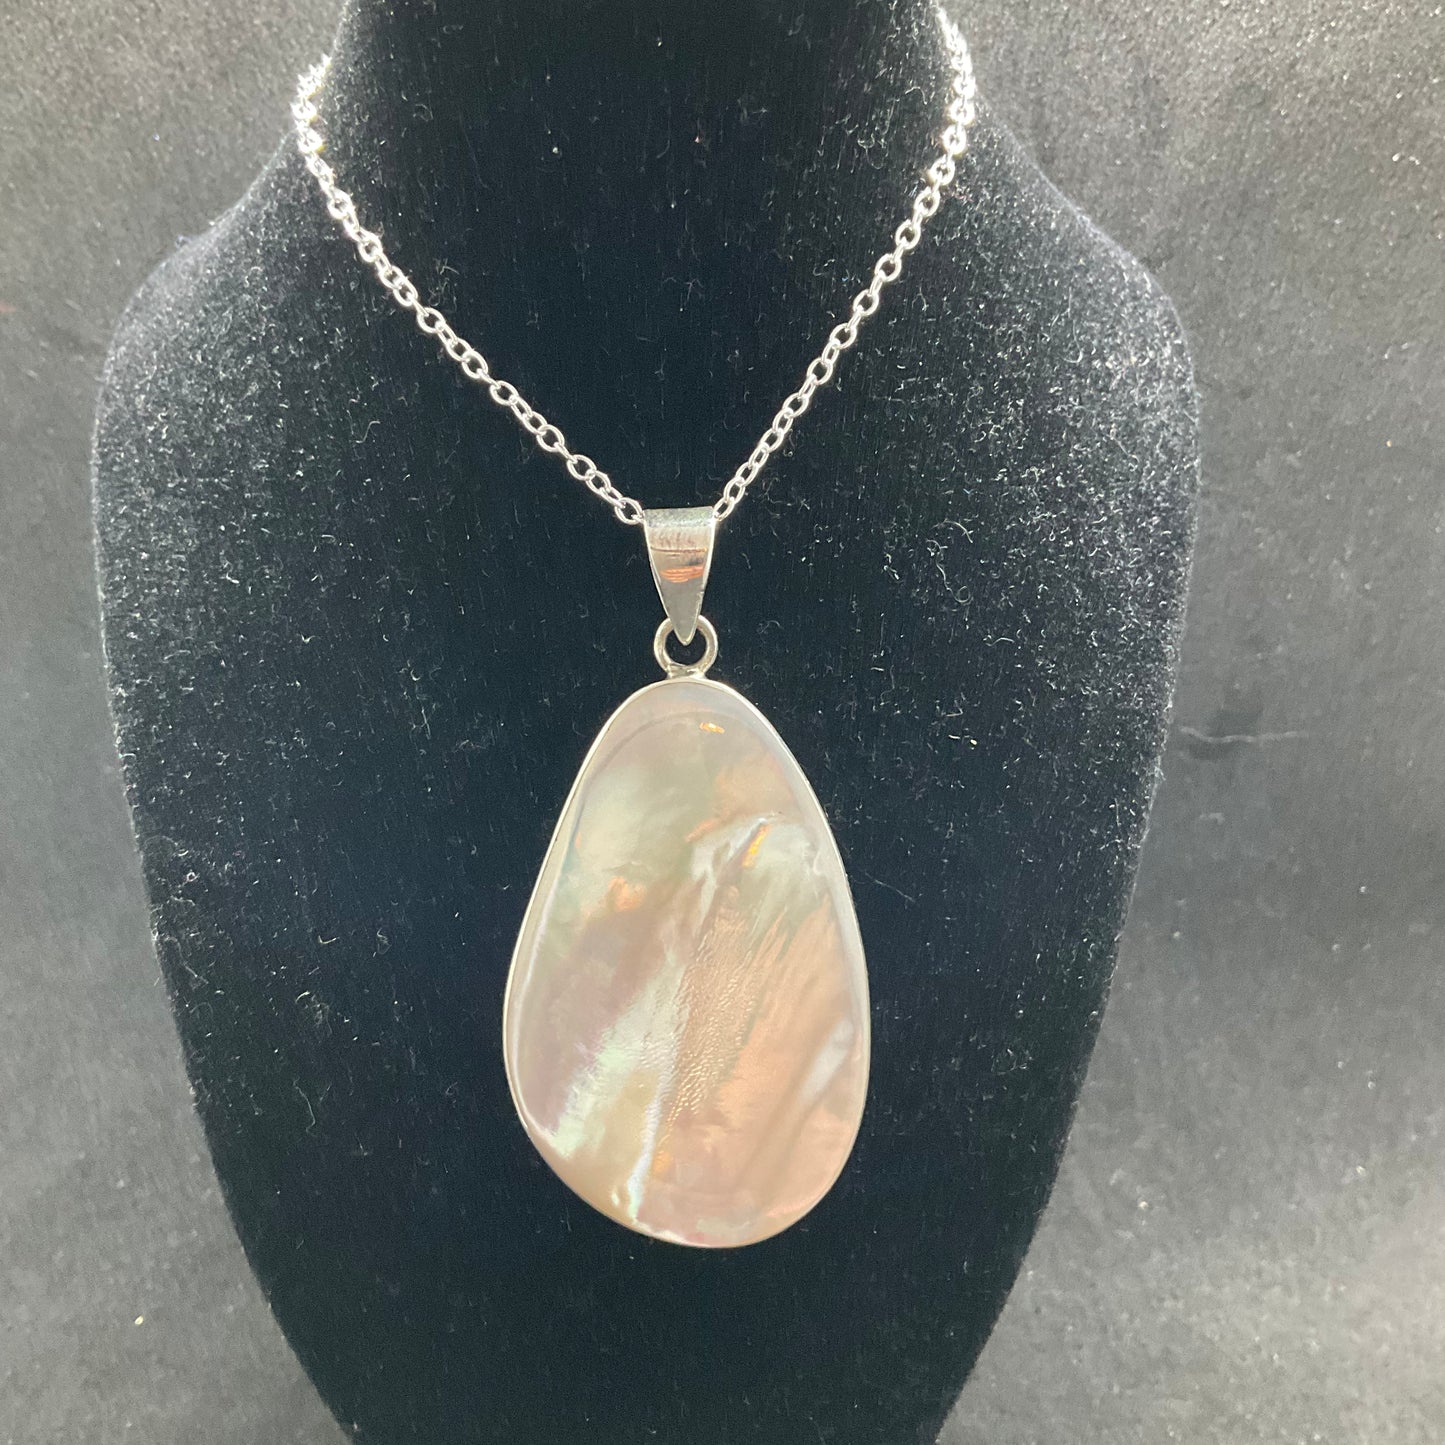 Vintage Mother of Pearl and 925 Silver Pendant